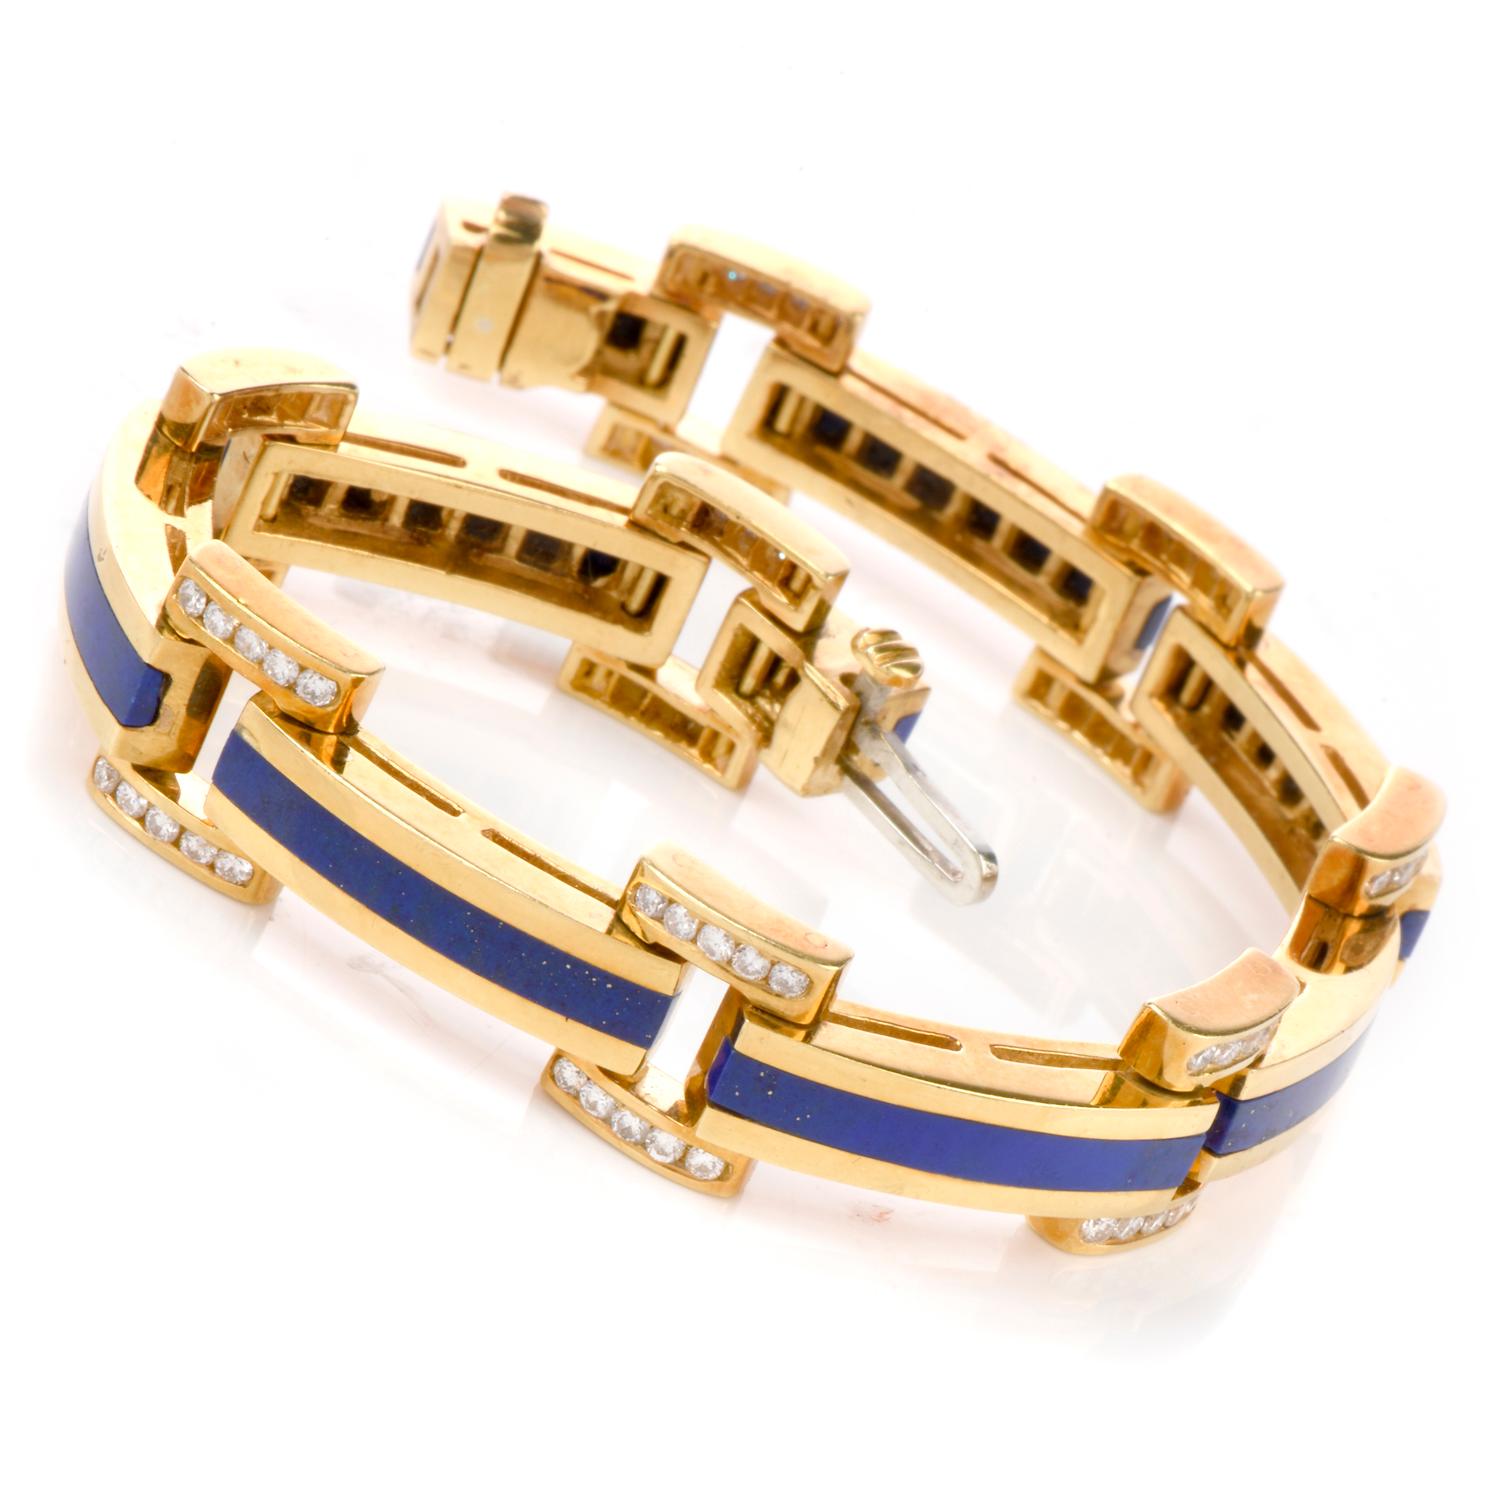 This high quality 1980's Diamond and Blue lapis bracelet was

inspired in a classic art deco design and crafted in 18k gold.

Alternating diagonal stripes of Diamond and Blue Enamel adorn this piece.

80 fine round-cut diamonds weighing approx.1.50